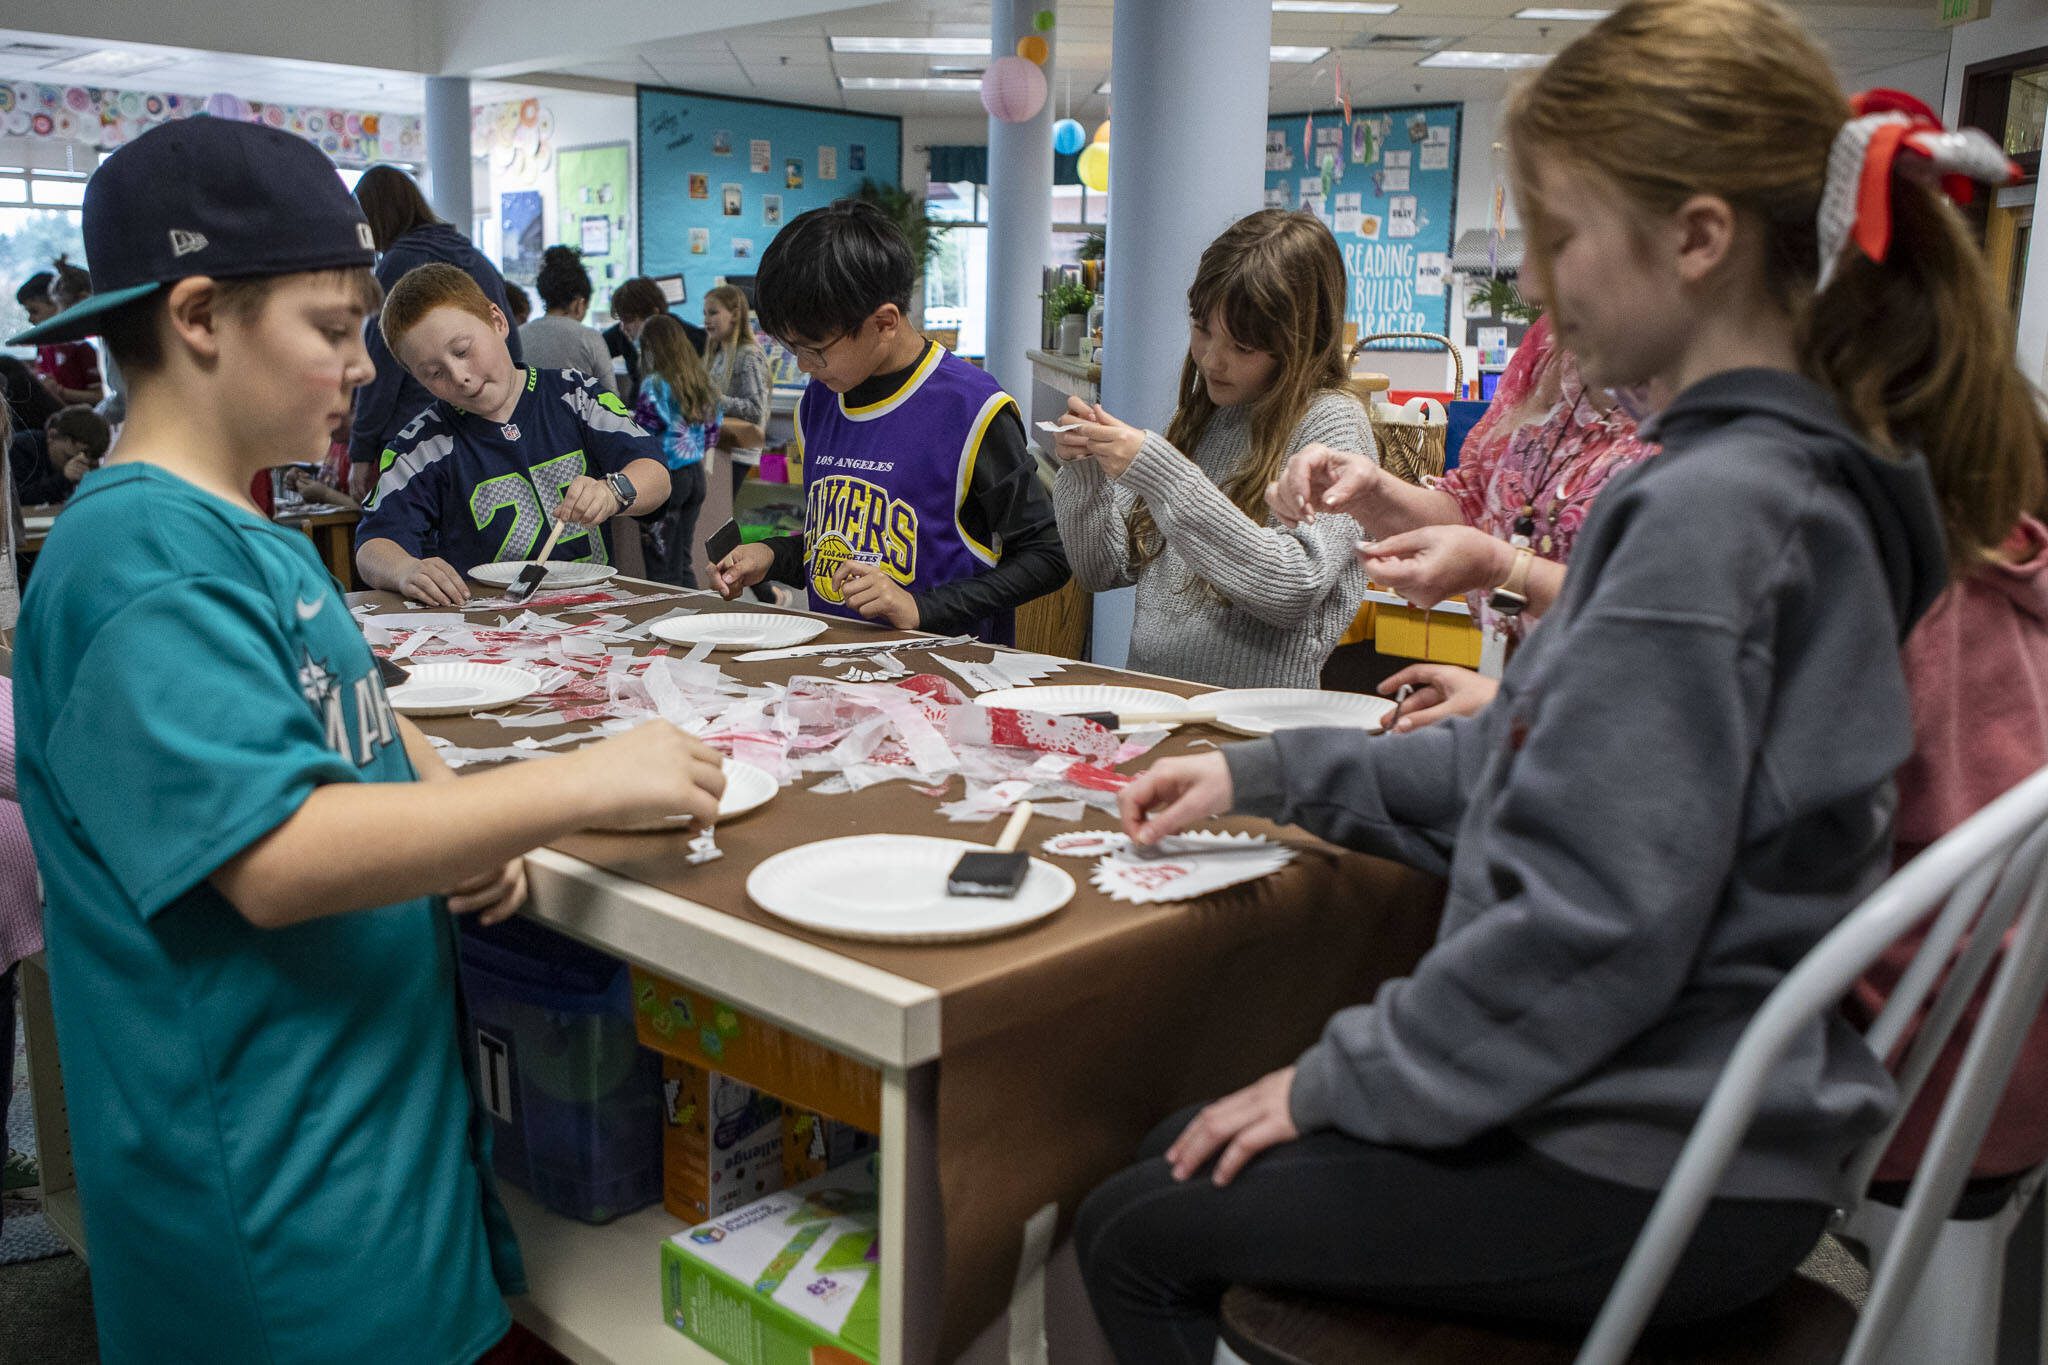 Students work on cutting pieces of paper for a mural during the "Afternoon of the Arts" program, where students spend part of the day on an art project at Utsalady Elementary on March 22, 2024 in Camano, Washington. (Annie Barker / The Herald)